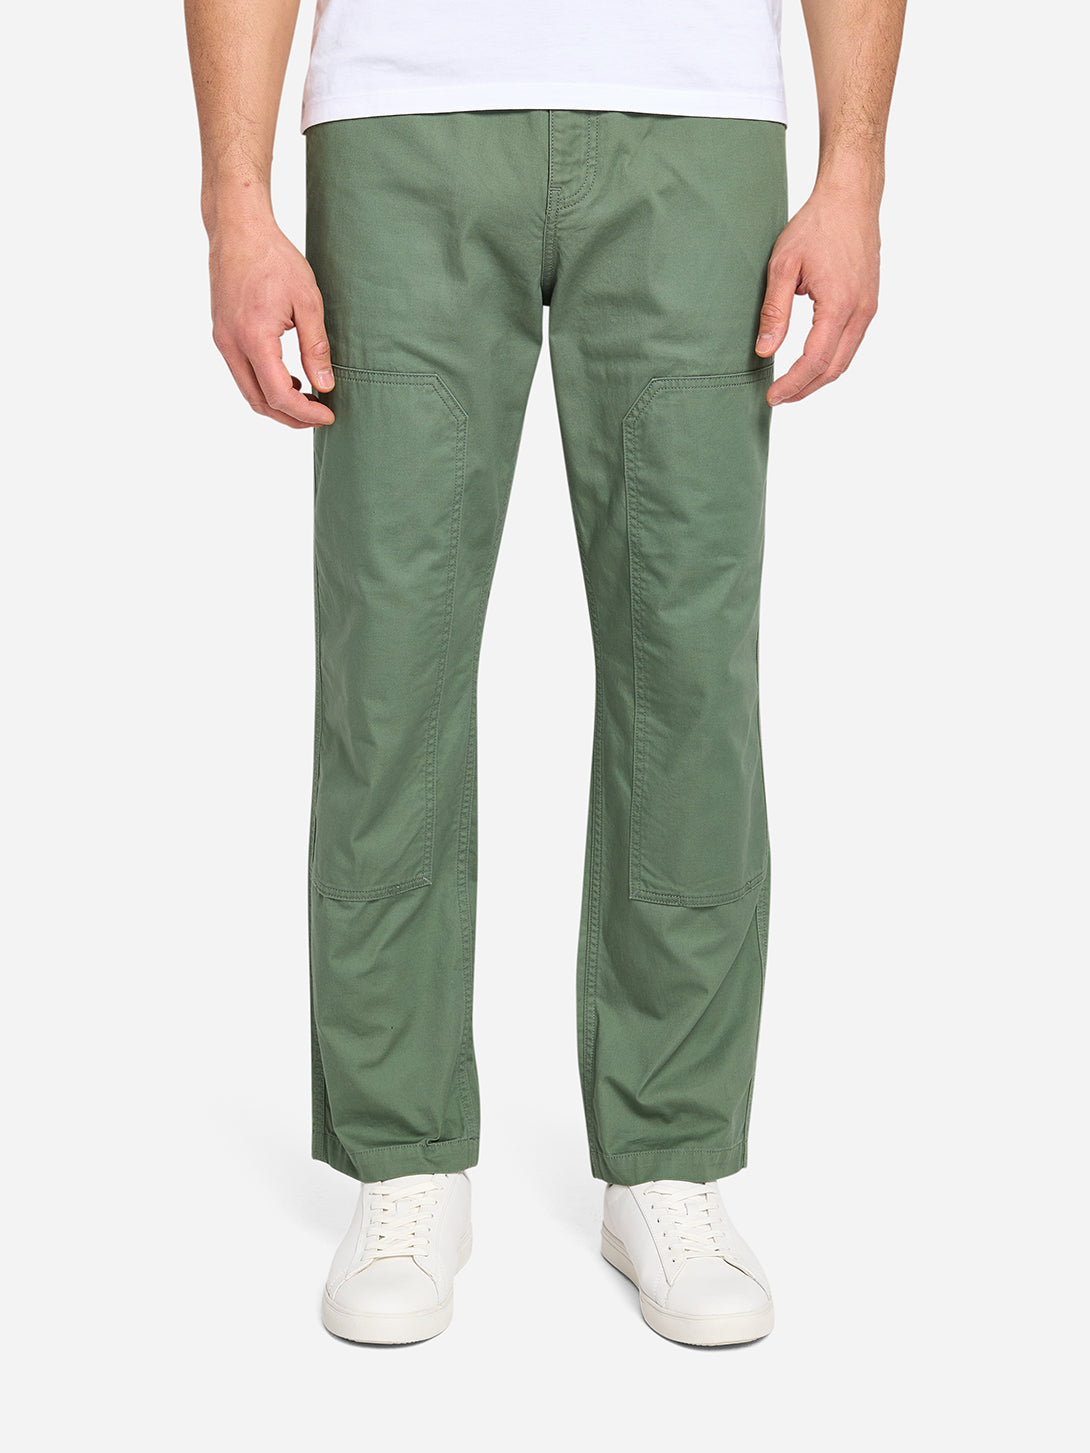 Agave Green Crosby Patch Pants Mens Worker Structured Lightweight Patched